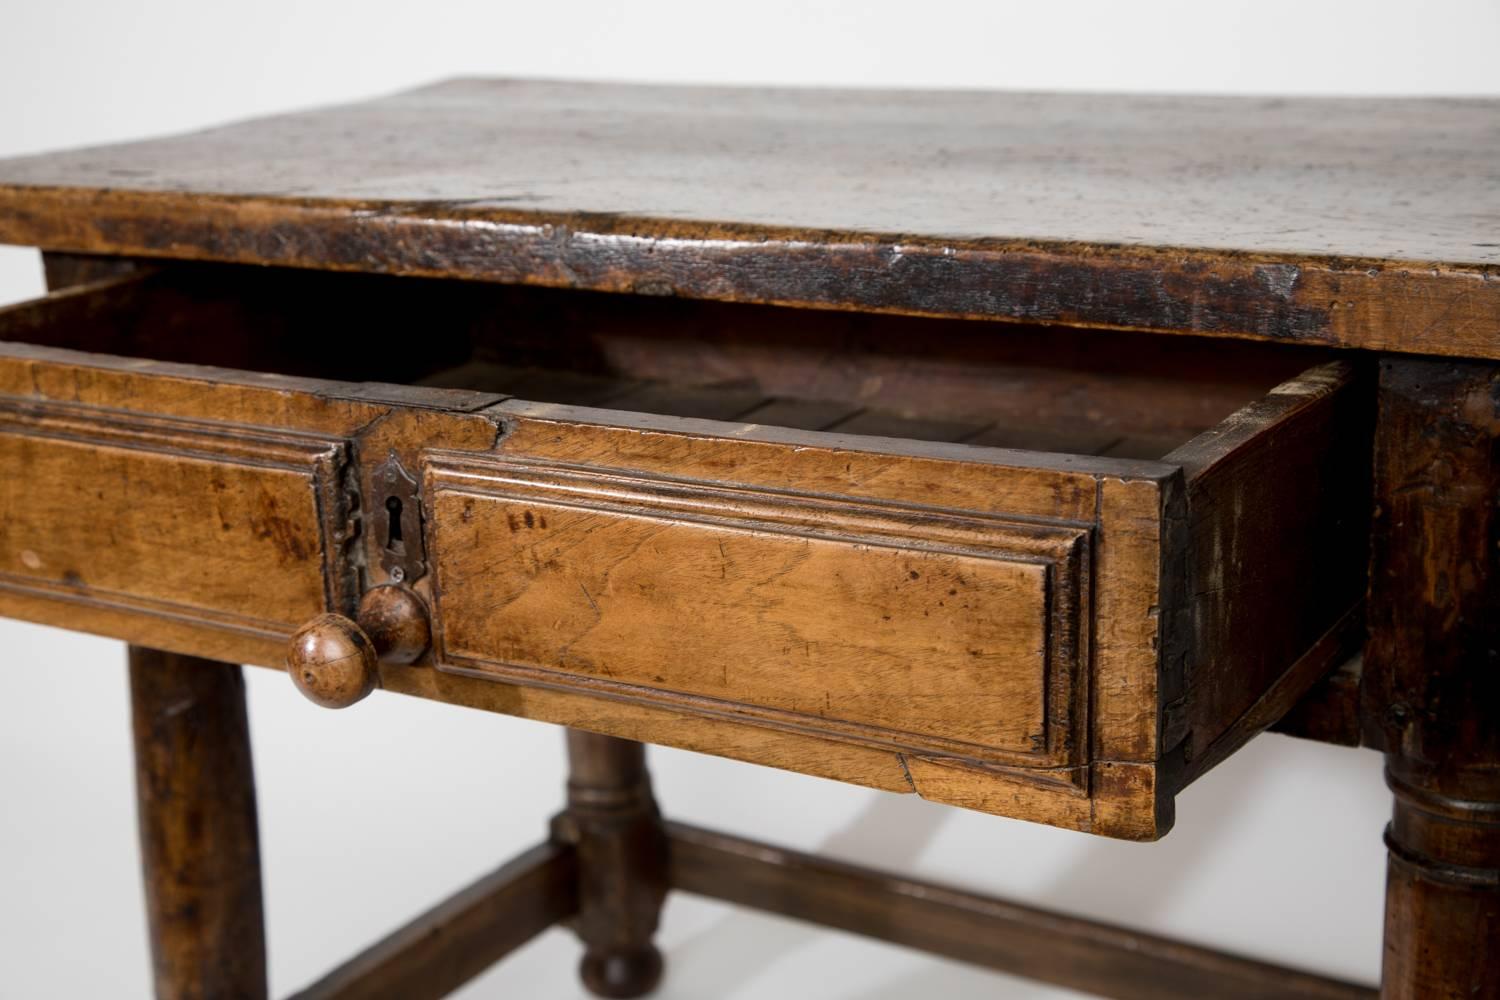 Lovely rustic walnut low table with one drawer, English, 18th century.